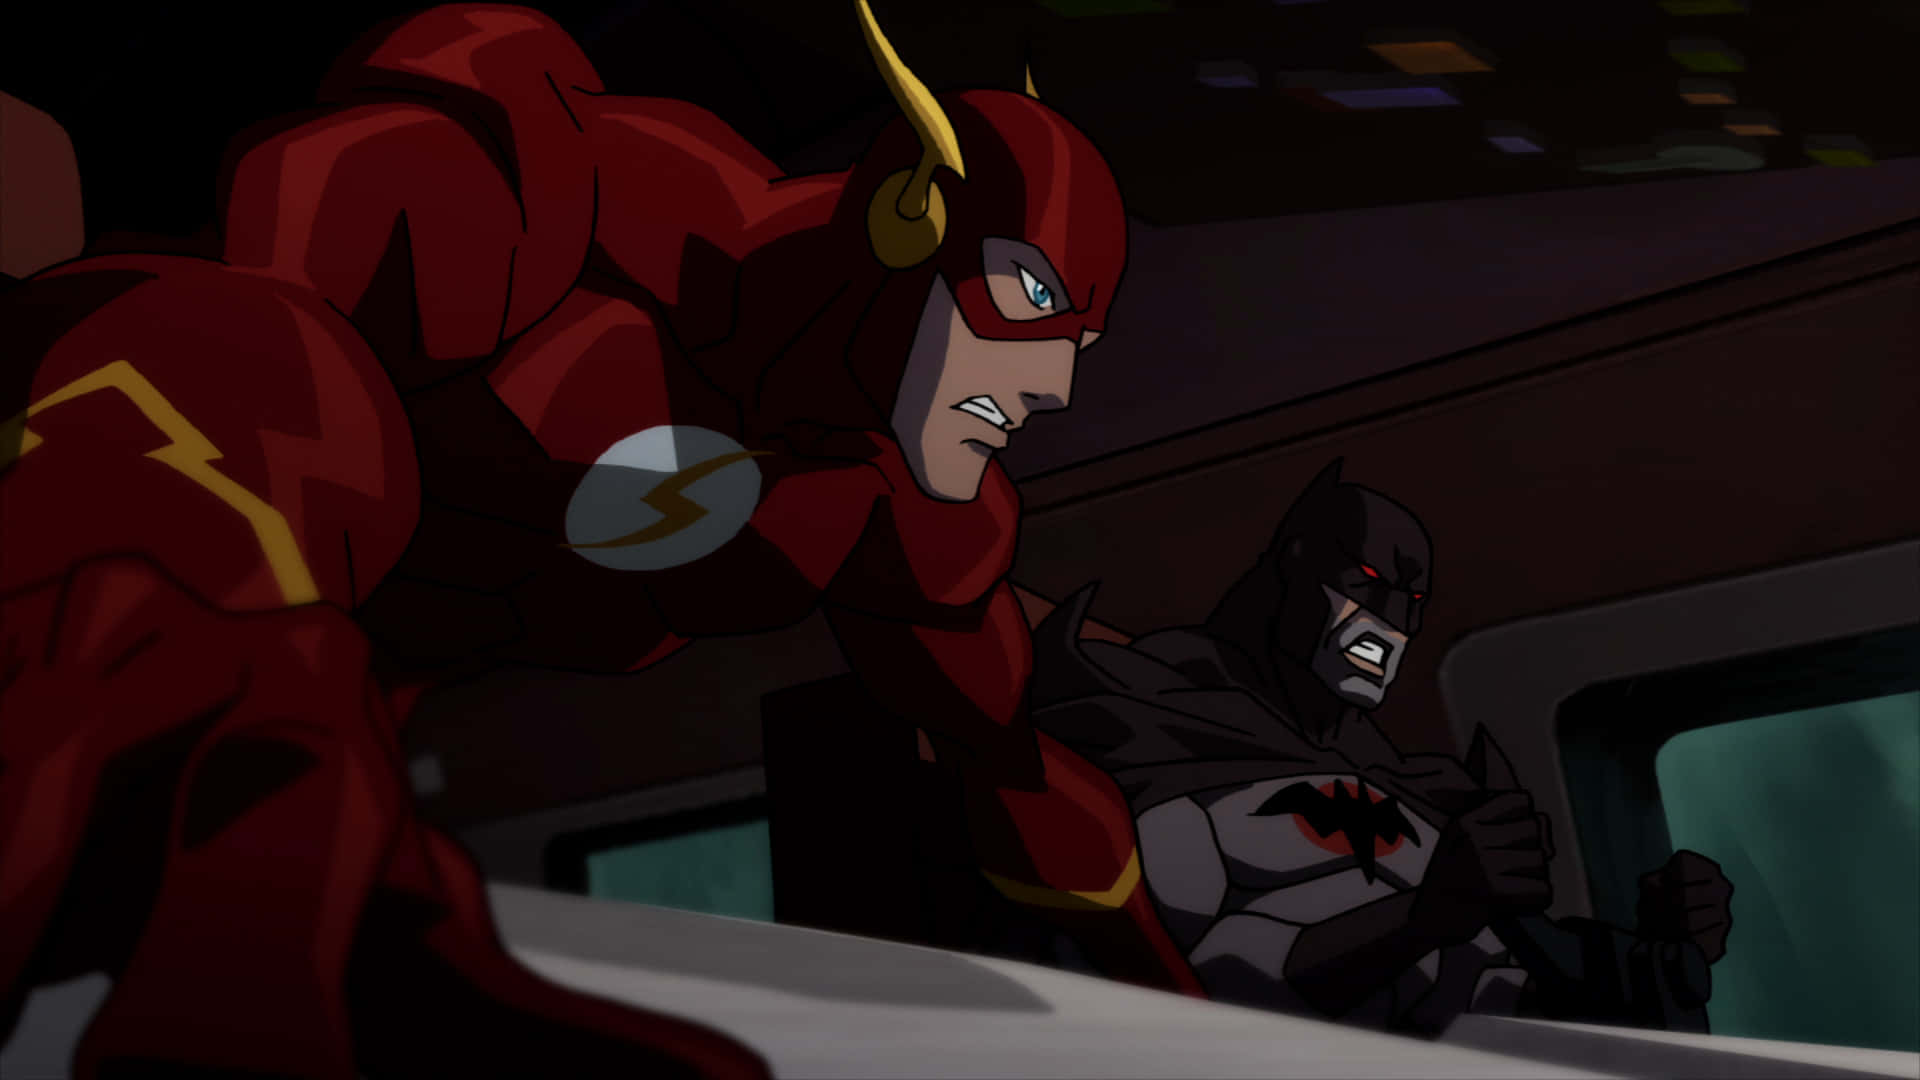 Justice League The Flashpoint Paradox - Flash and Team in Action Wallpaper